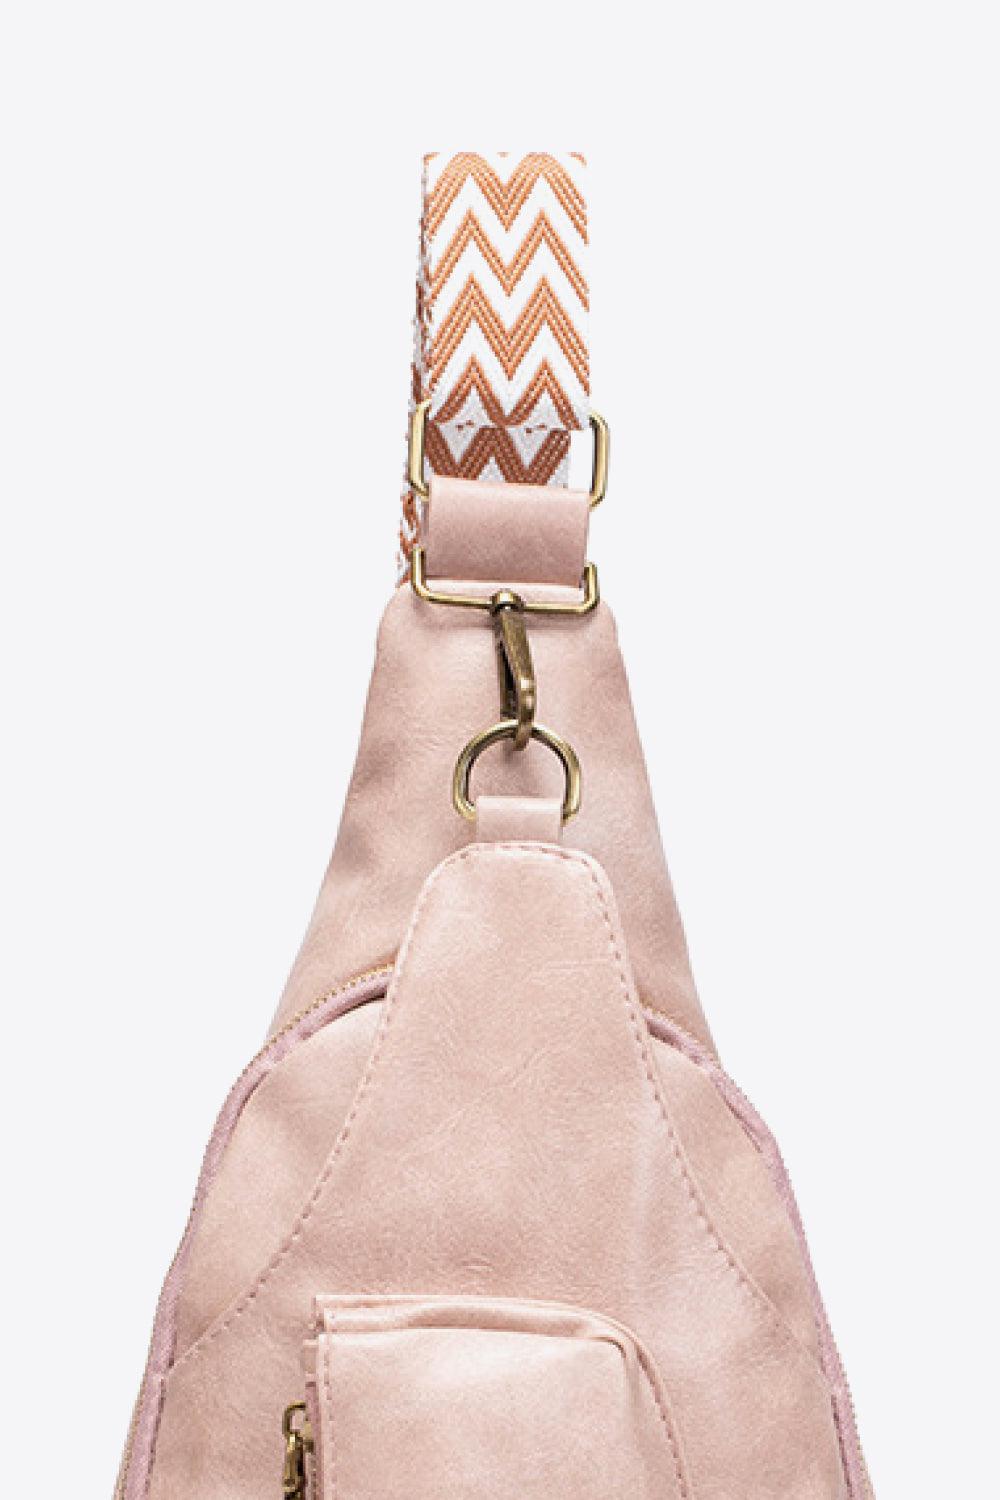 All The Feels PU Leather Sling Bag - Flyclothing LLC